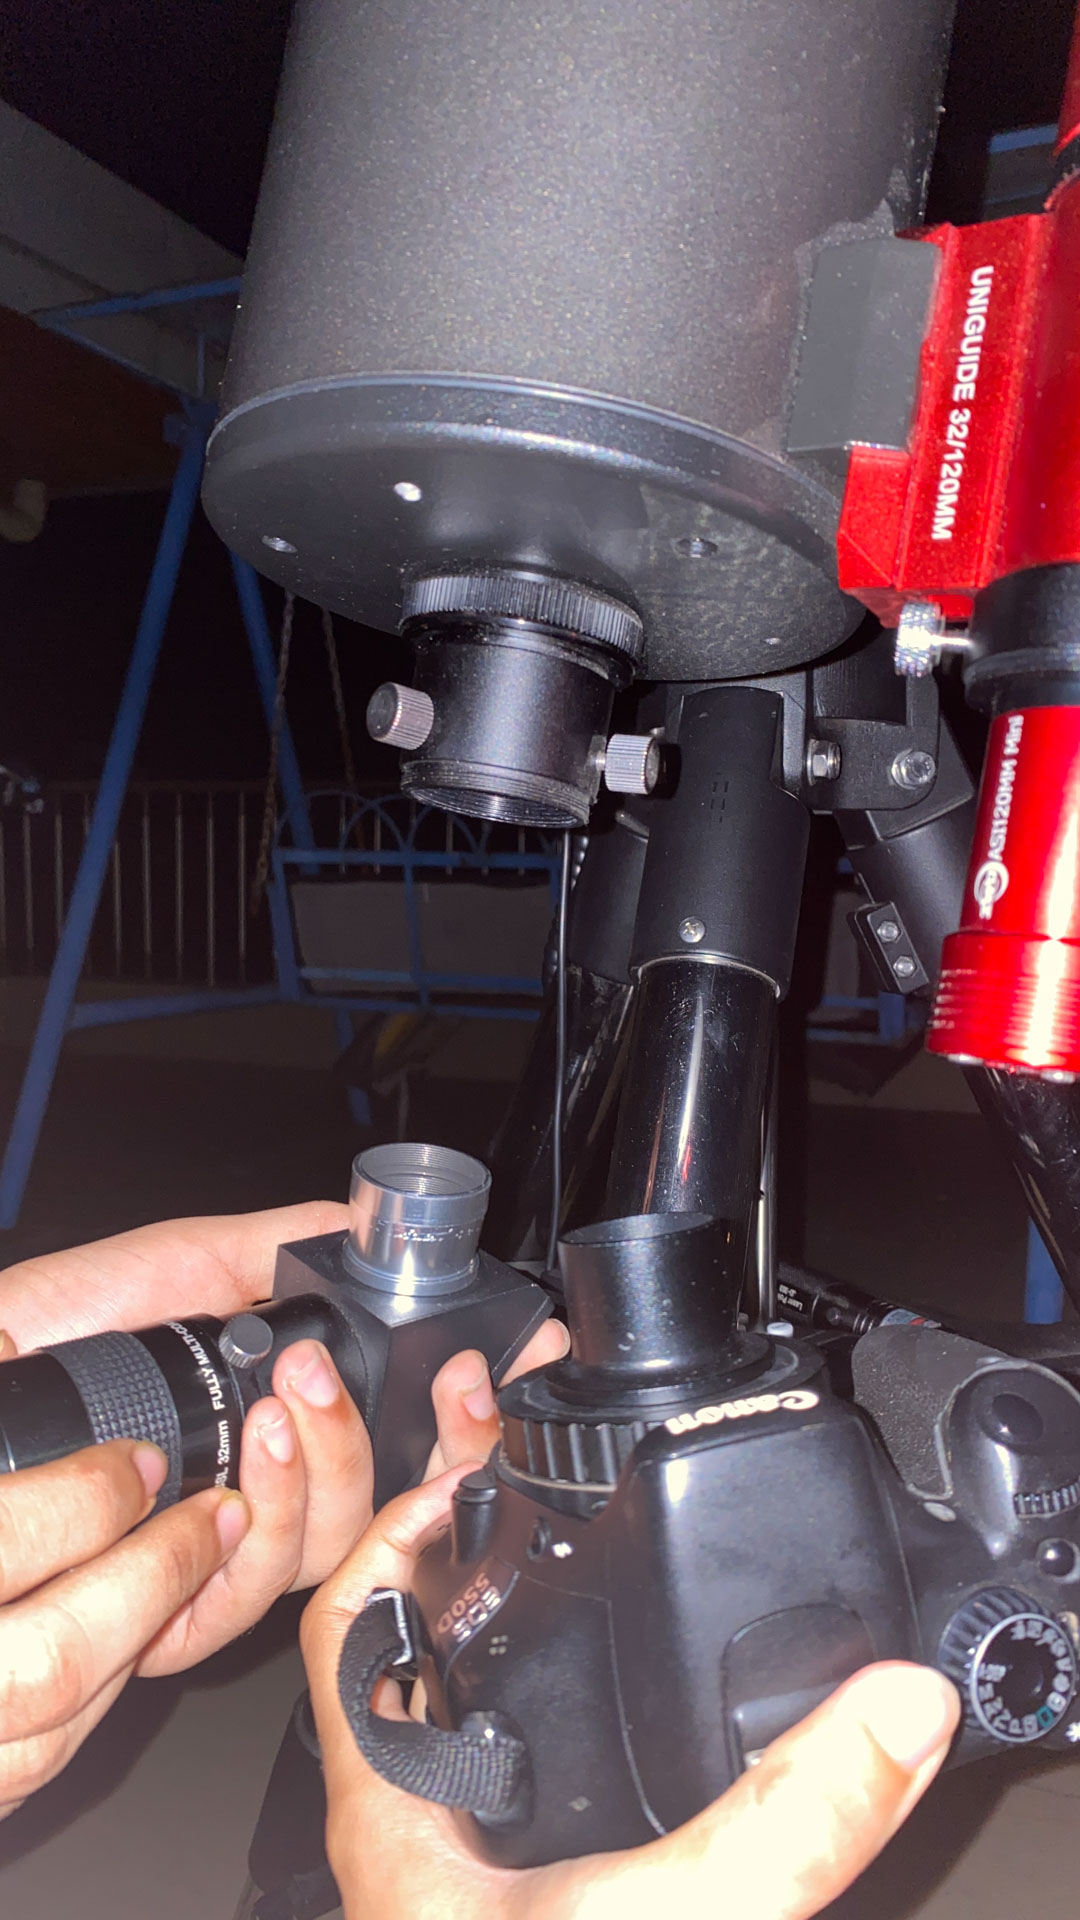 Attaching the DSLR to the telescope